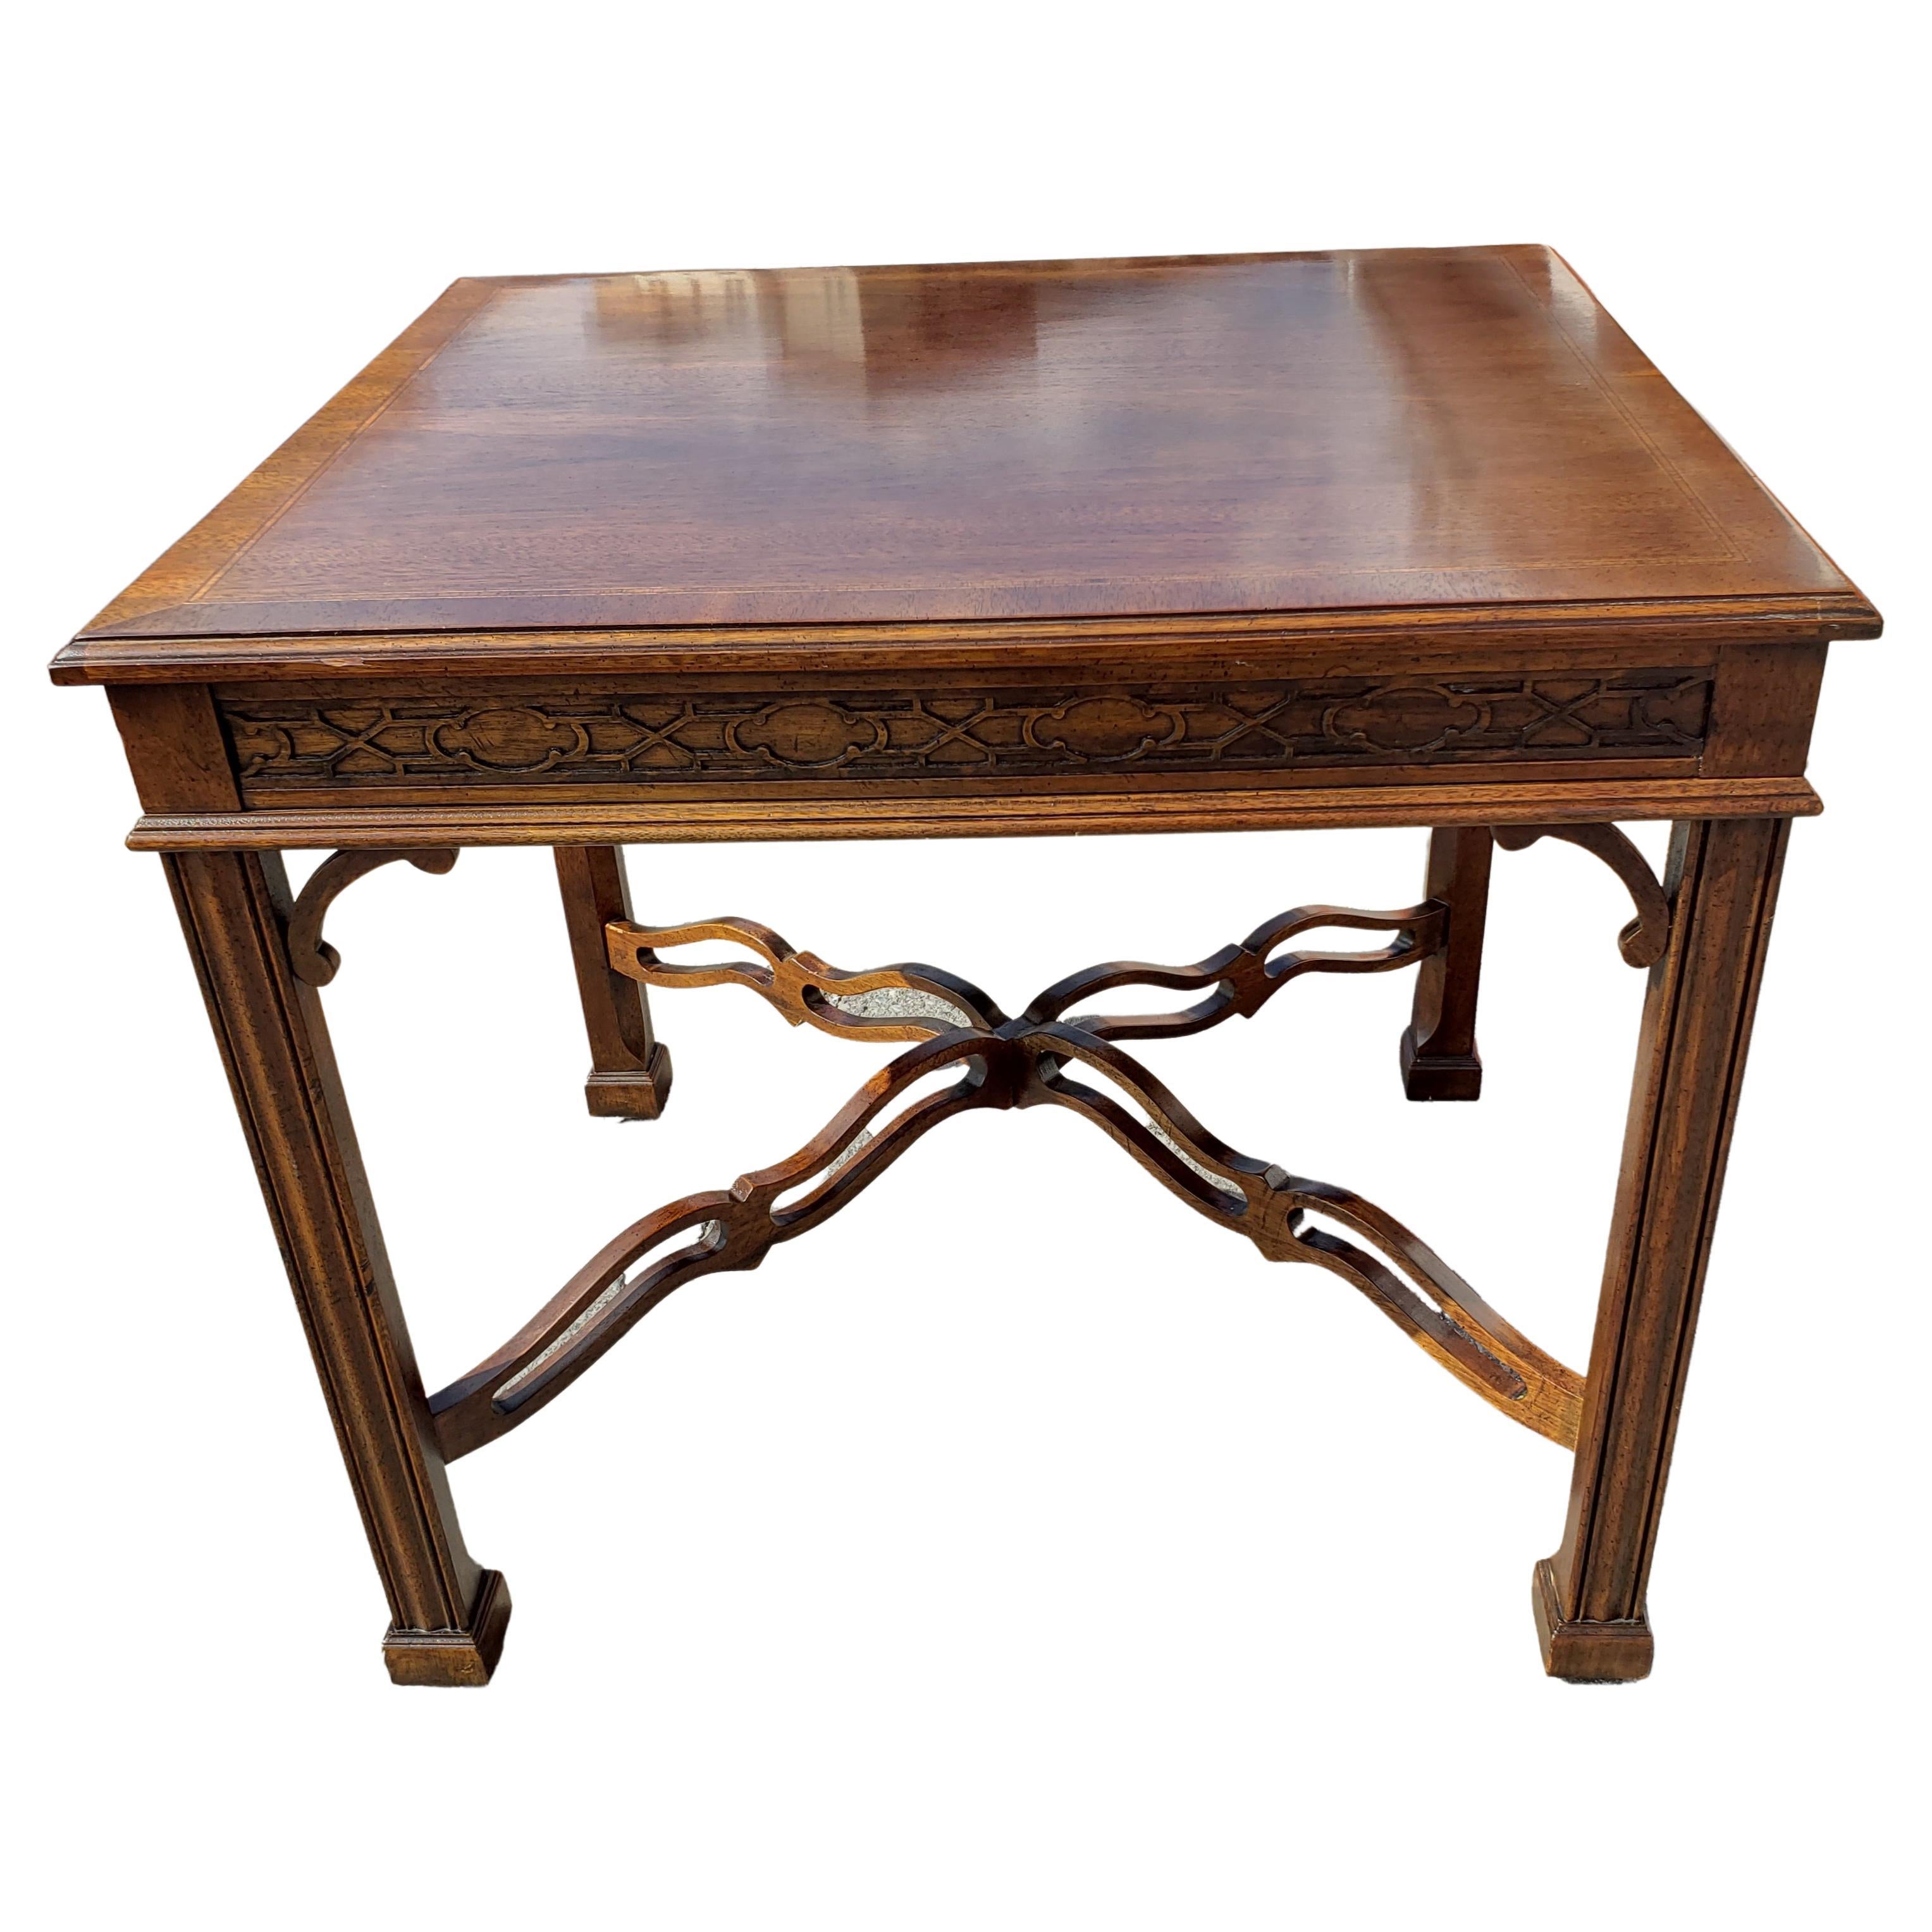 1980s Drexel Heritage Chippendale Walnut Accent Table W/ Fretwork and Banded Top